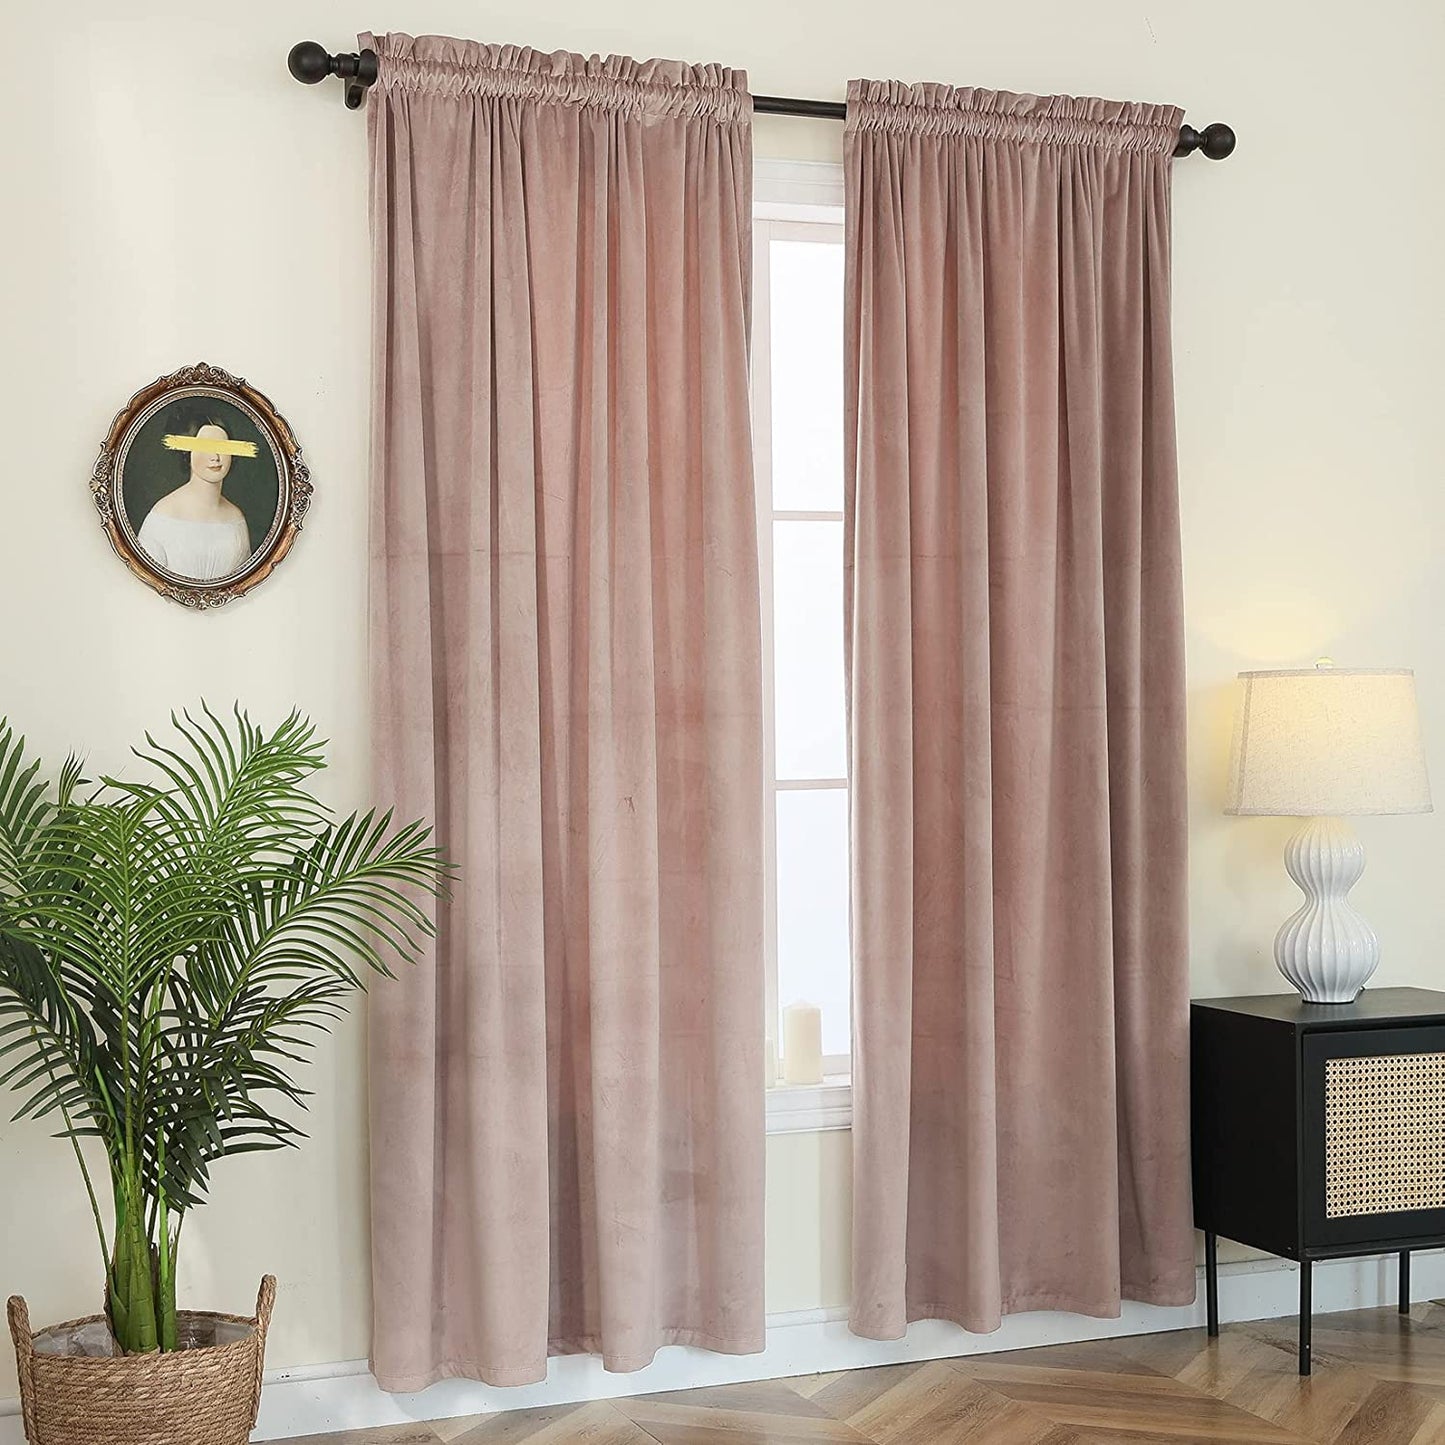 WOD FAMY Velvet Blackout Curtains Drapes Rod Pocket for Living Room/French Door, 52Wx84L Inch Per Panel, 2 Pcs Red Wine